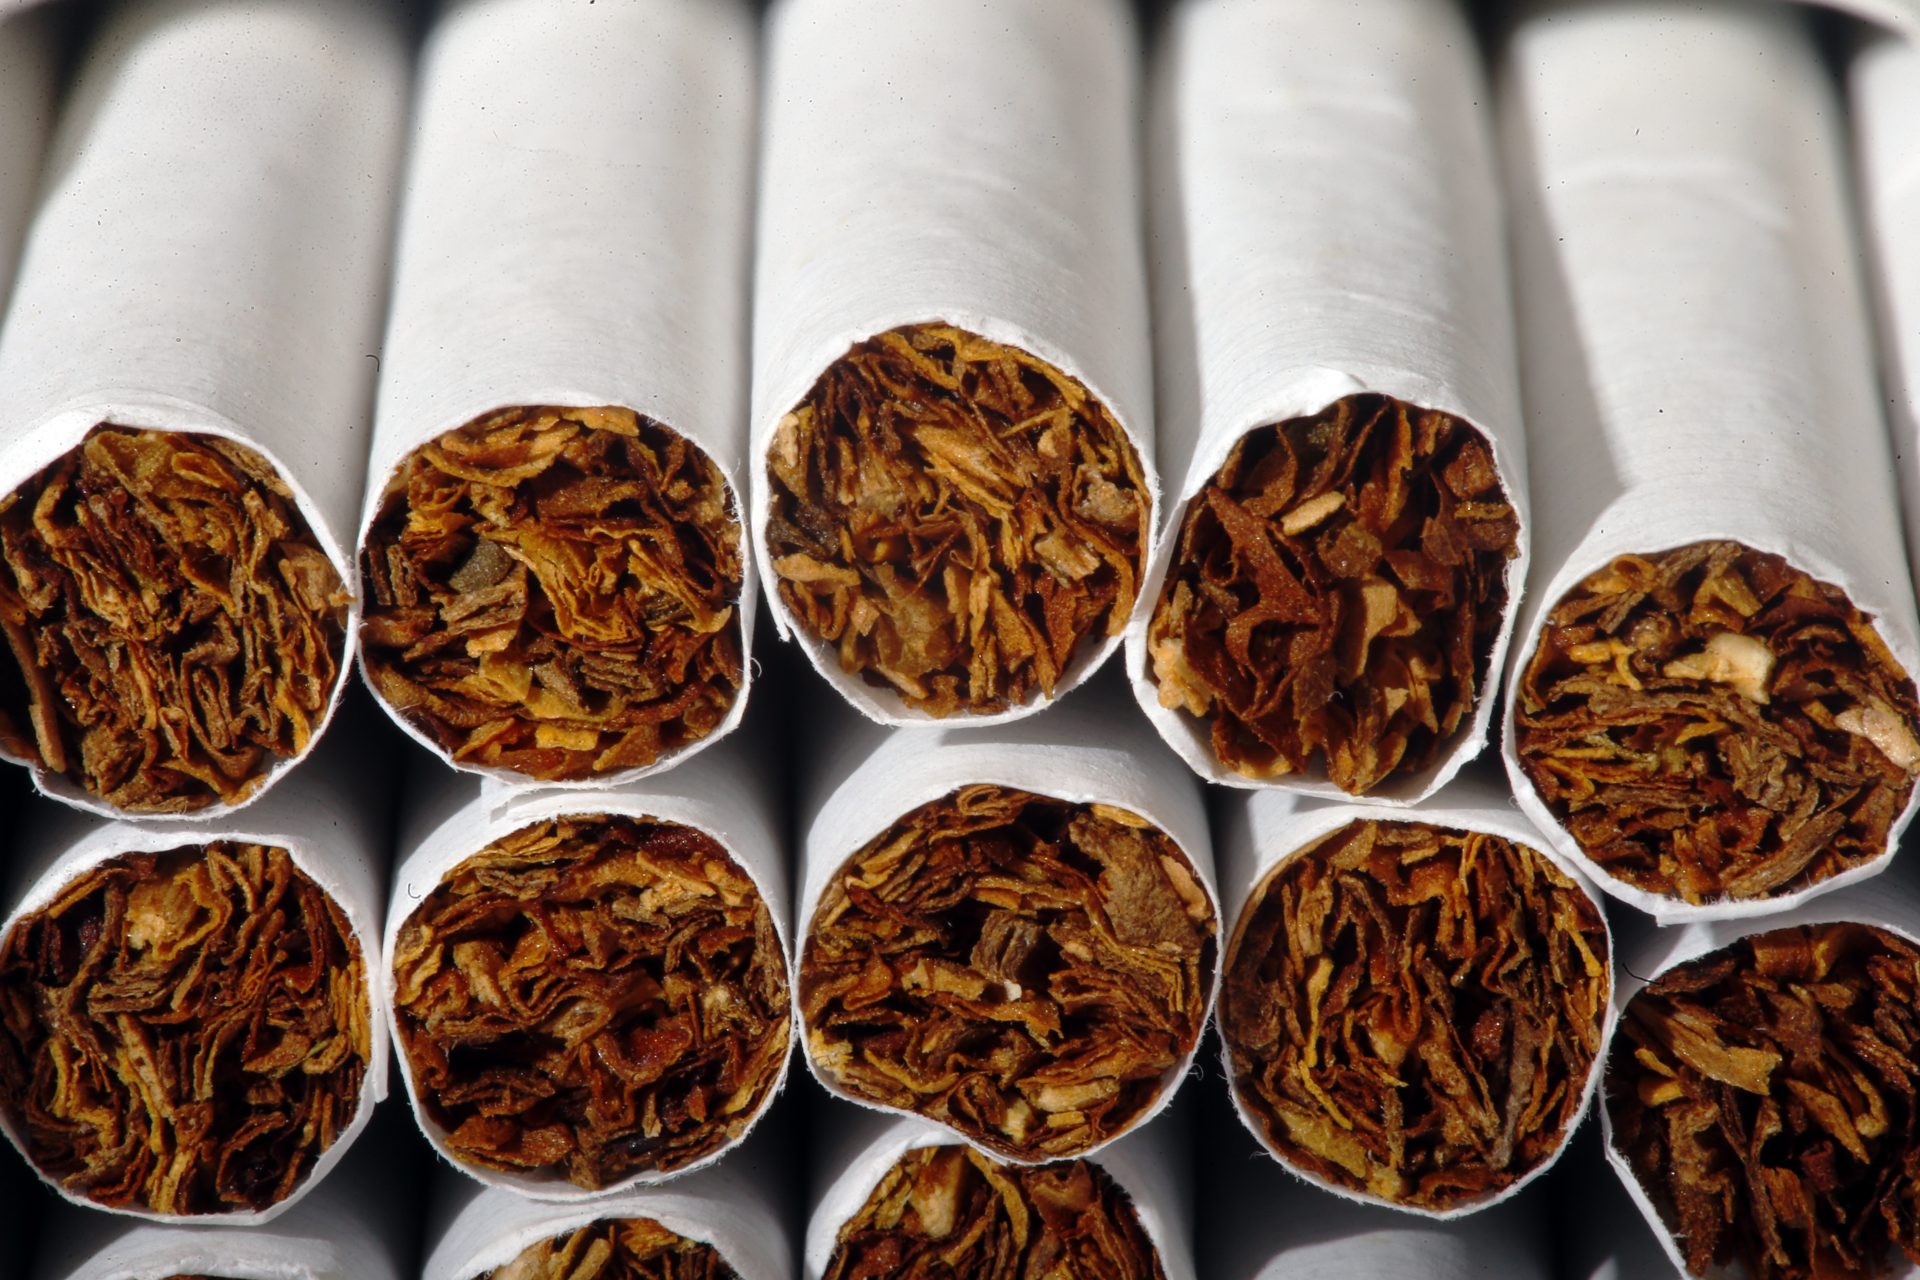 This Tuesday, July 15, 2014 photo shows the tobacco in cigarettes in Philadelphia.